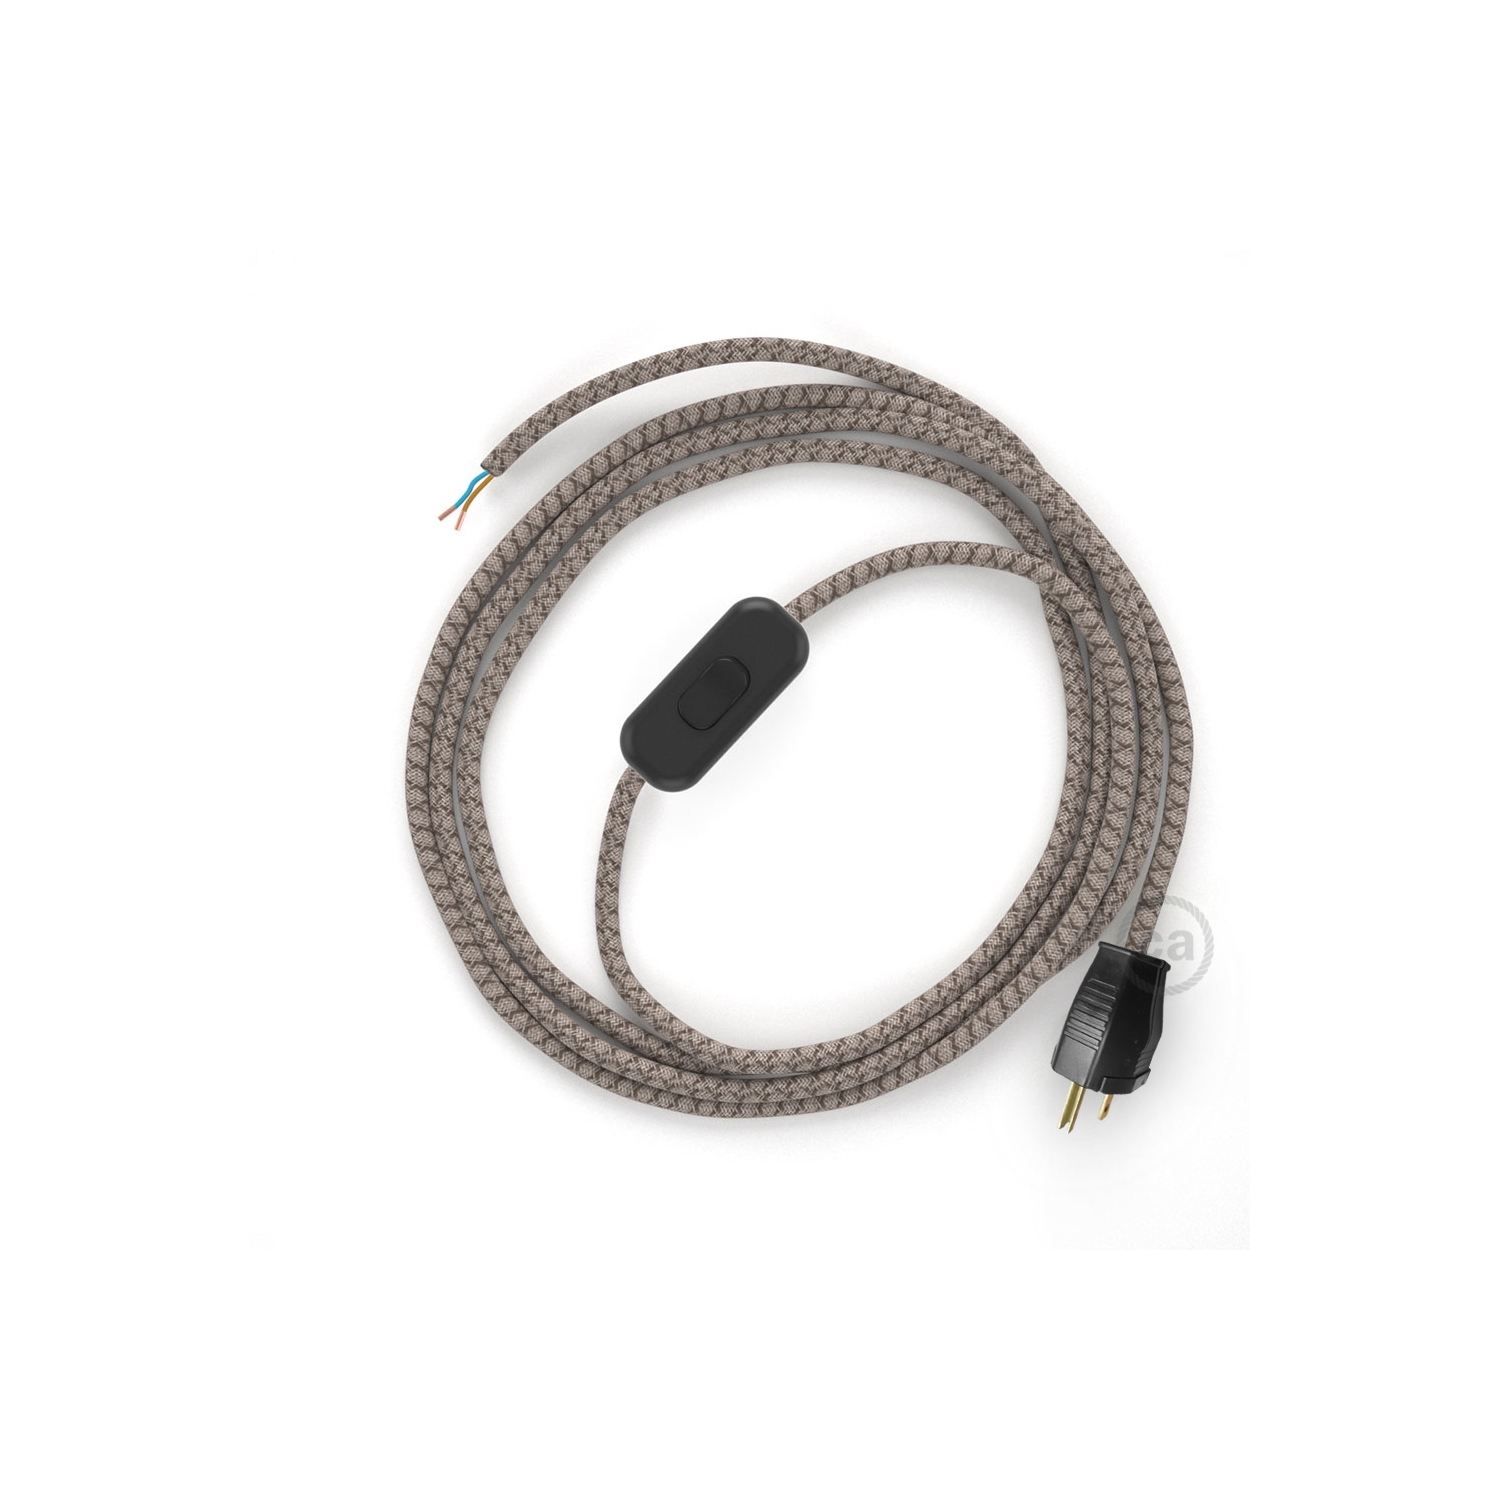 Power Cord with in-line switch, RD63 Natural & Brown Linen CrissCross - Choose color of switch/plug